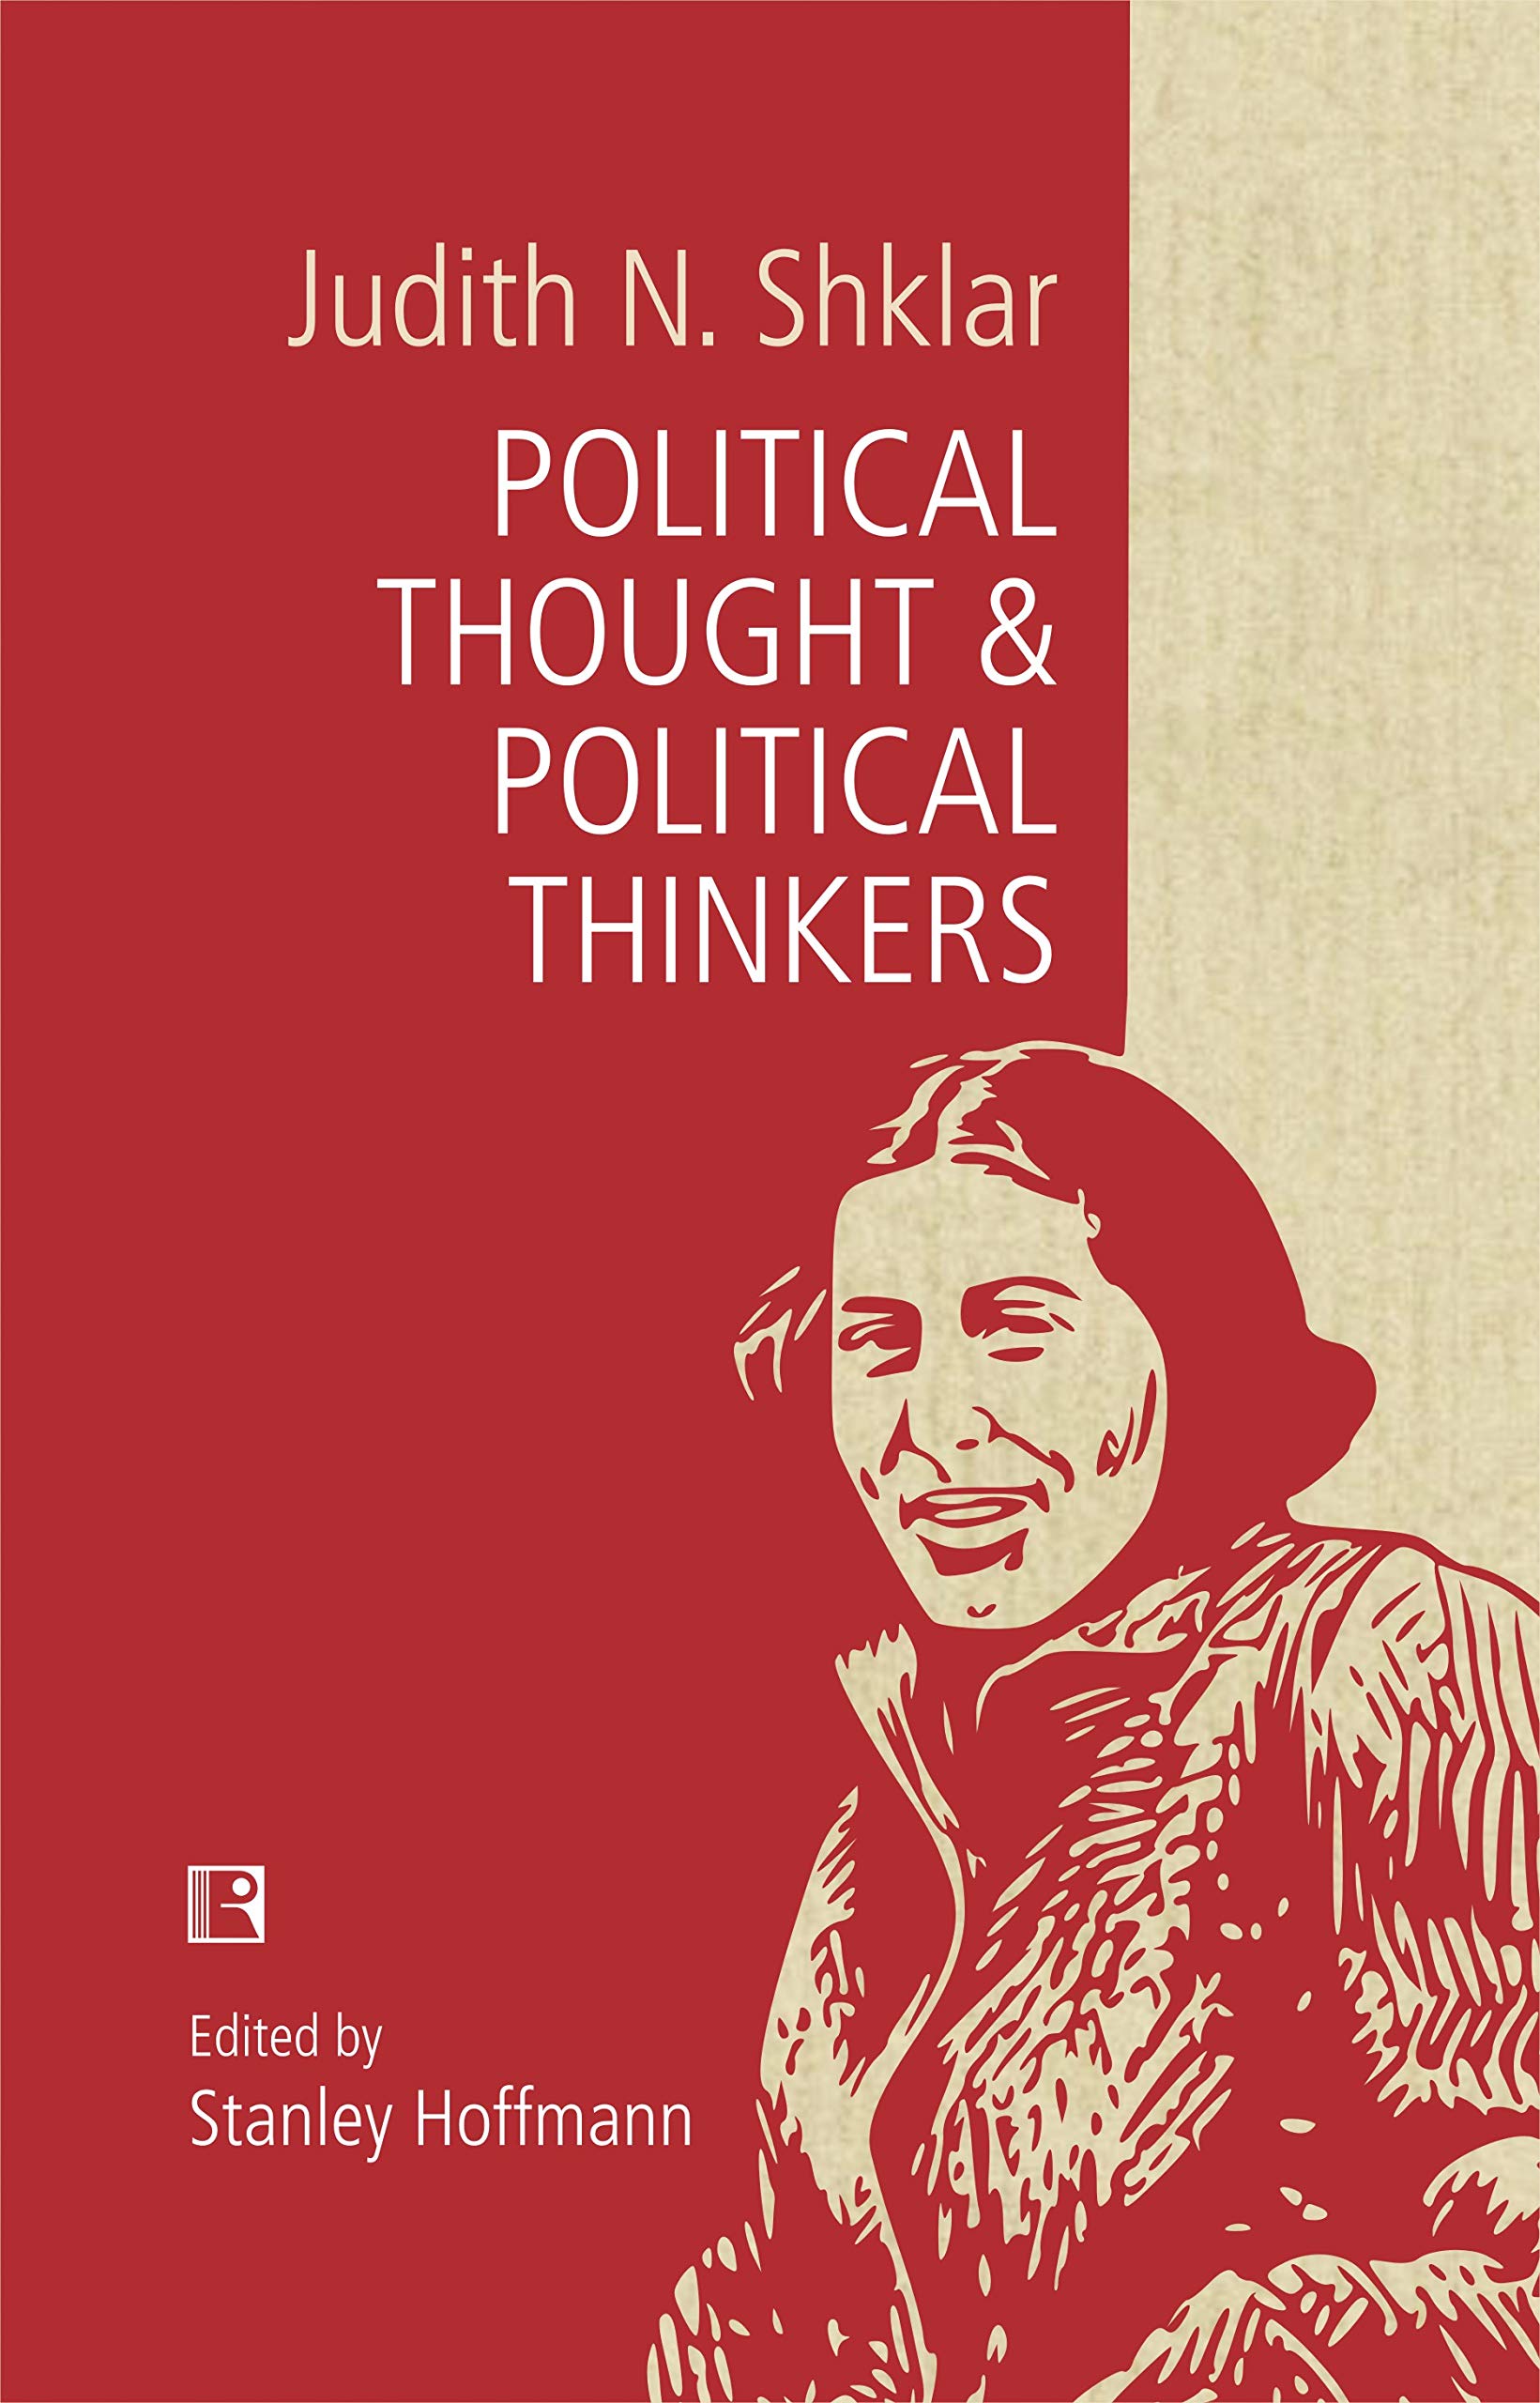 Political thought and political thinkers magazine reviews